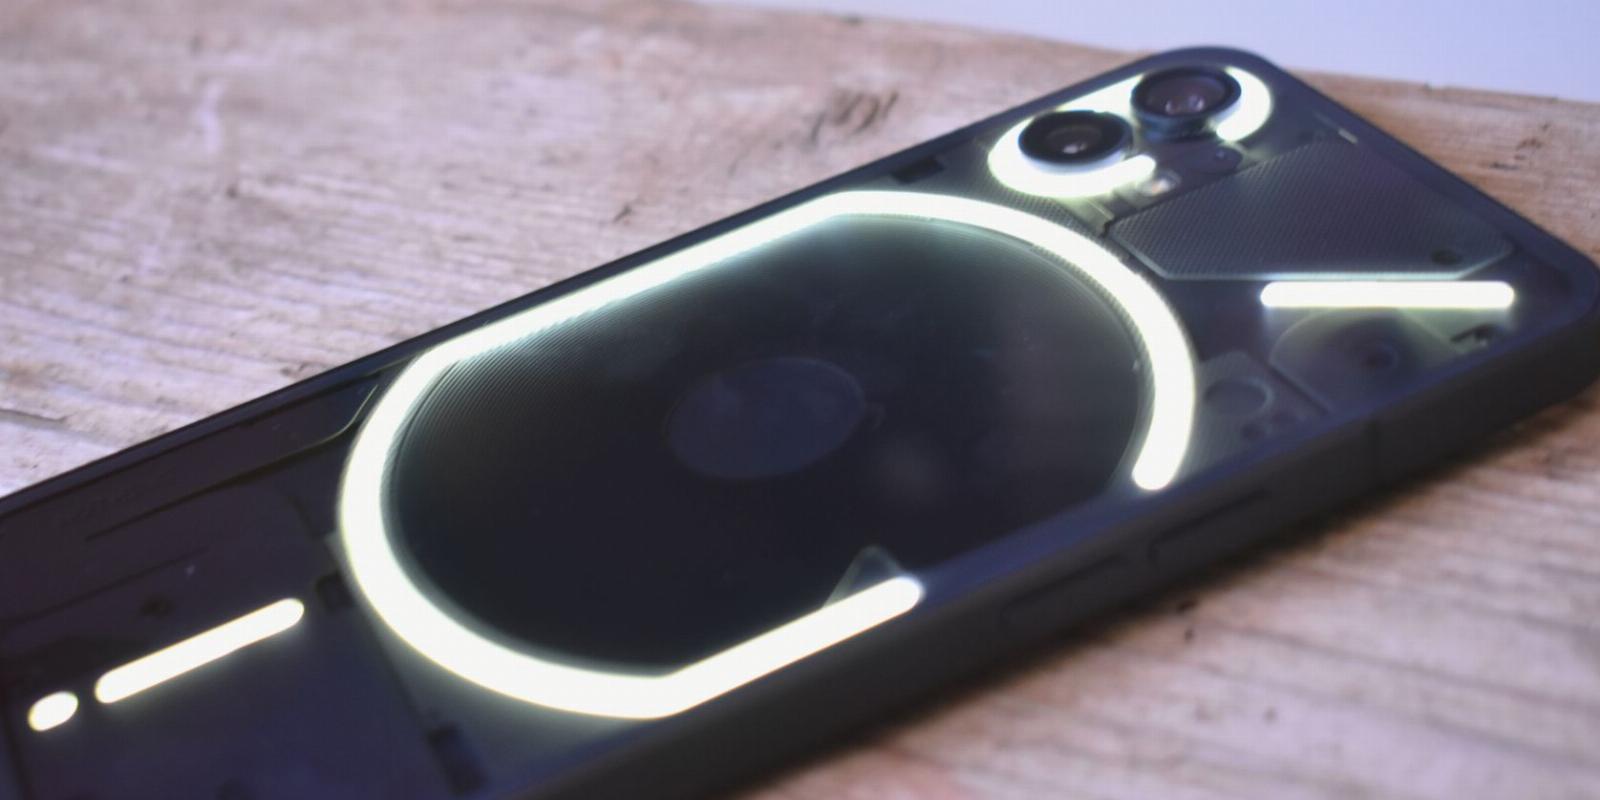 Is It Actually Helpful to Have LEDs on the Back of a Smartphone?